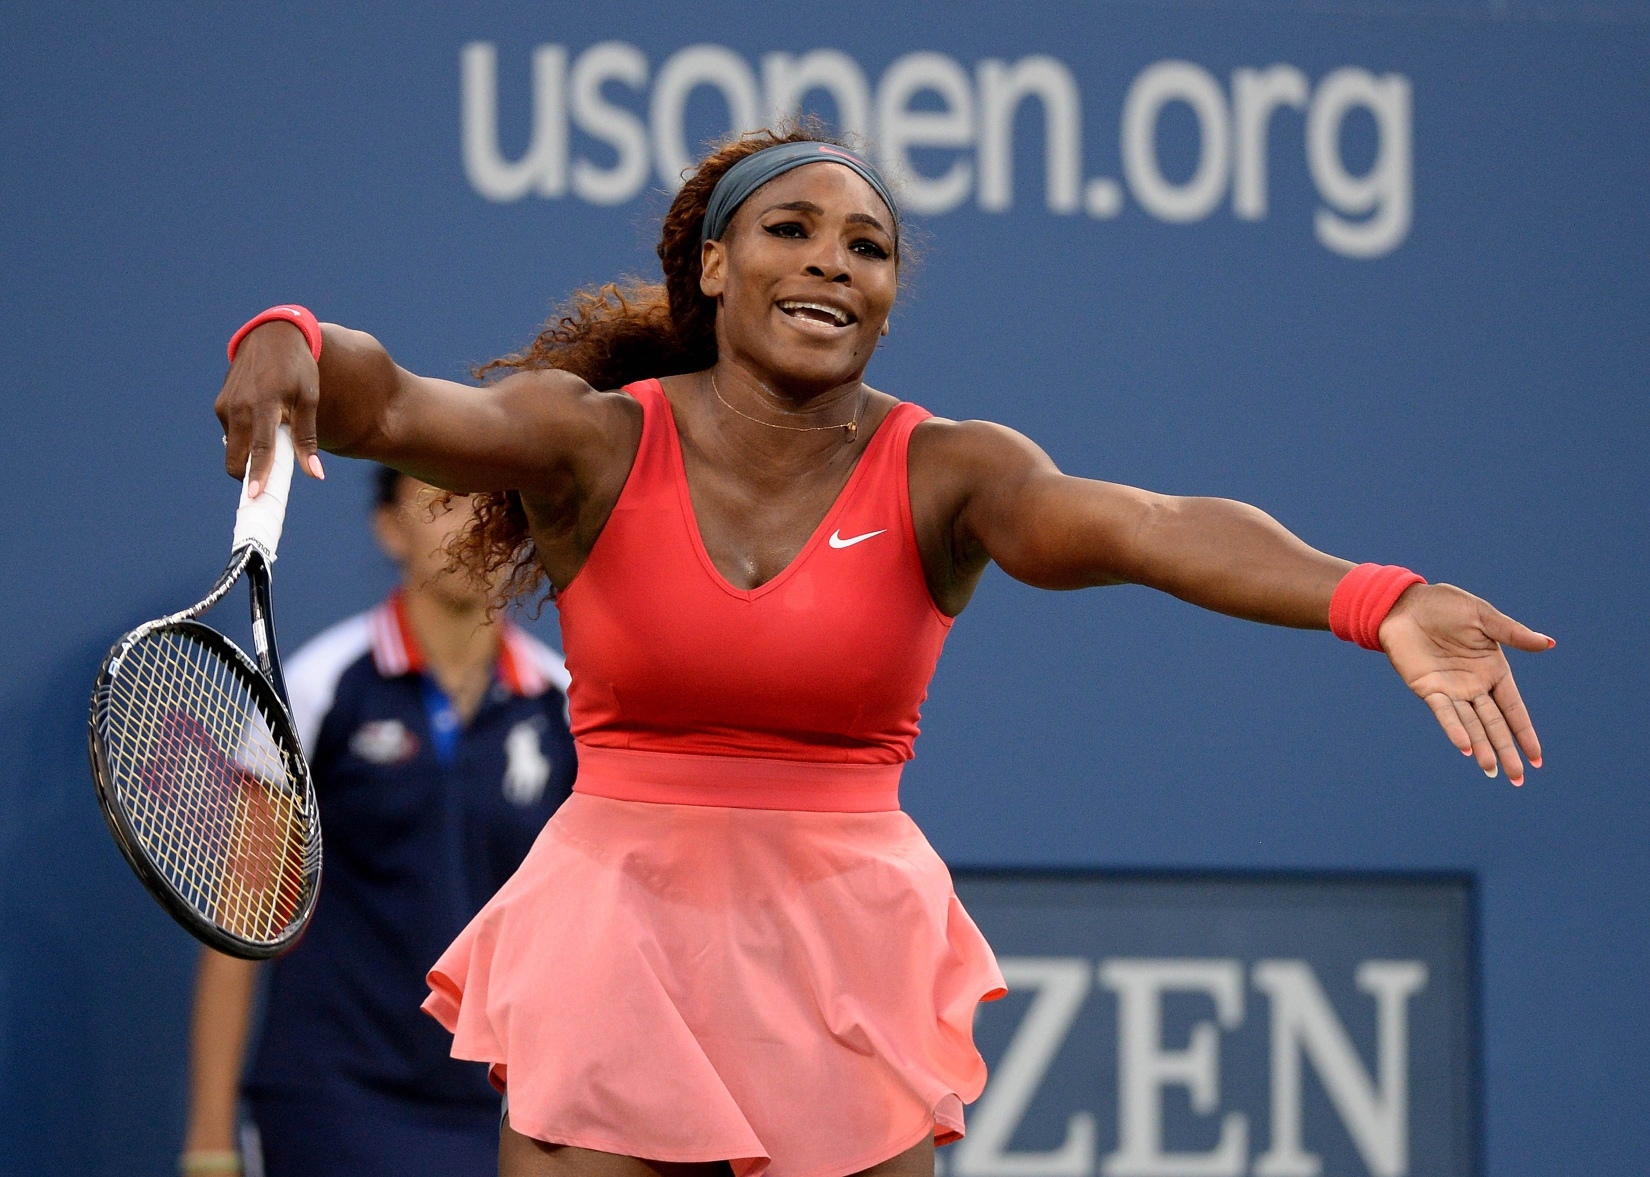 Serena Williams has won the year-end women’s world number one ranking for the third time. Photo: AFP